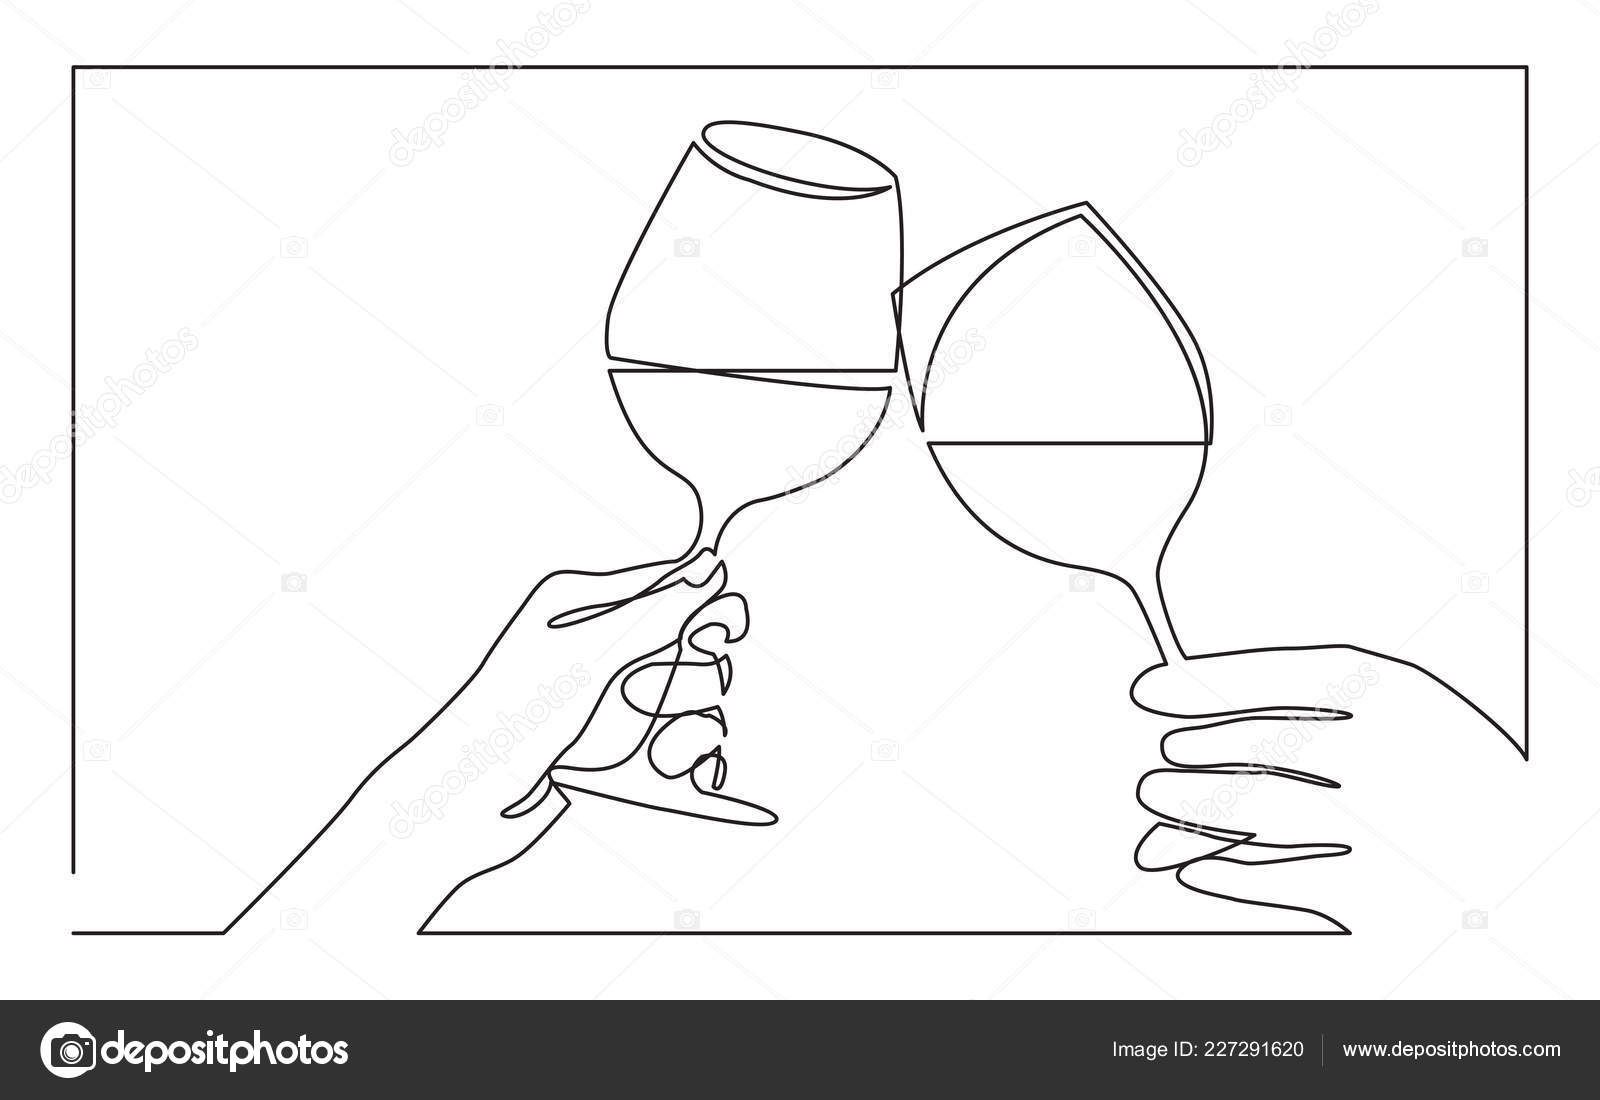 depositphotos_227291620-stock-illustration-continuous-line-drawing-two-hands.jpg